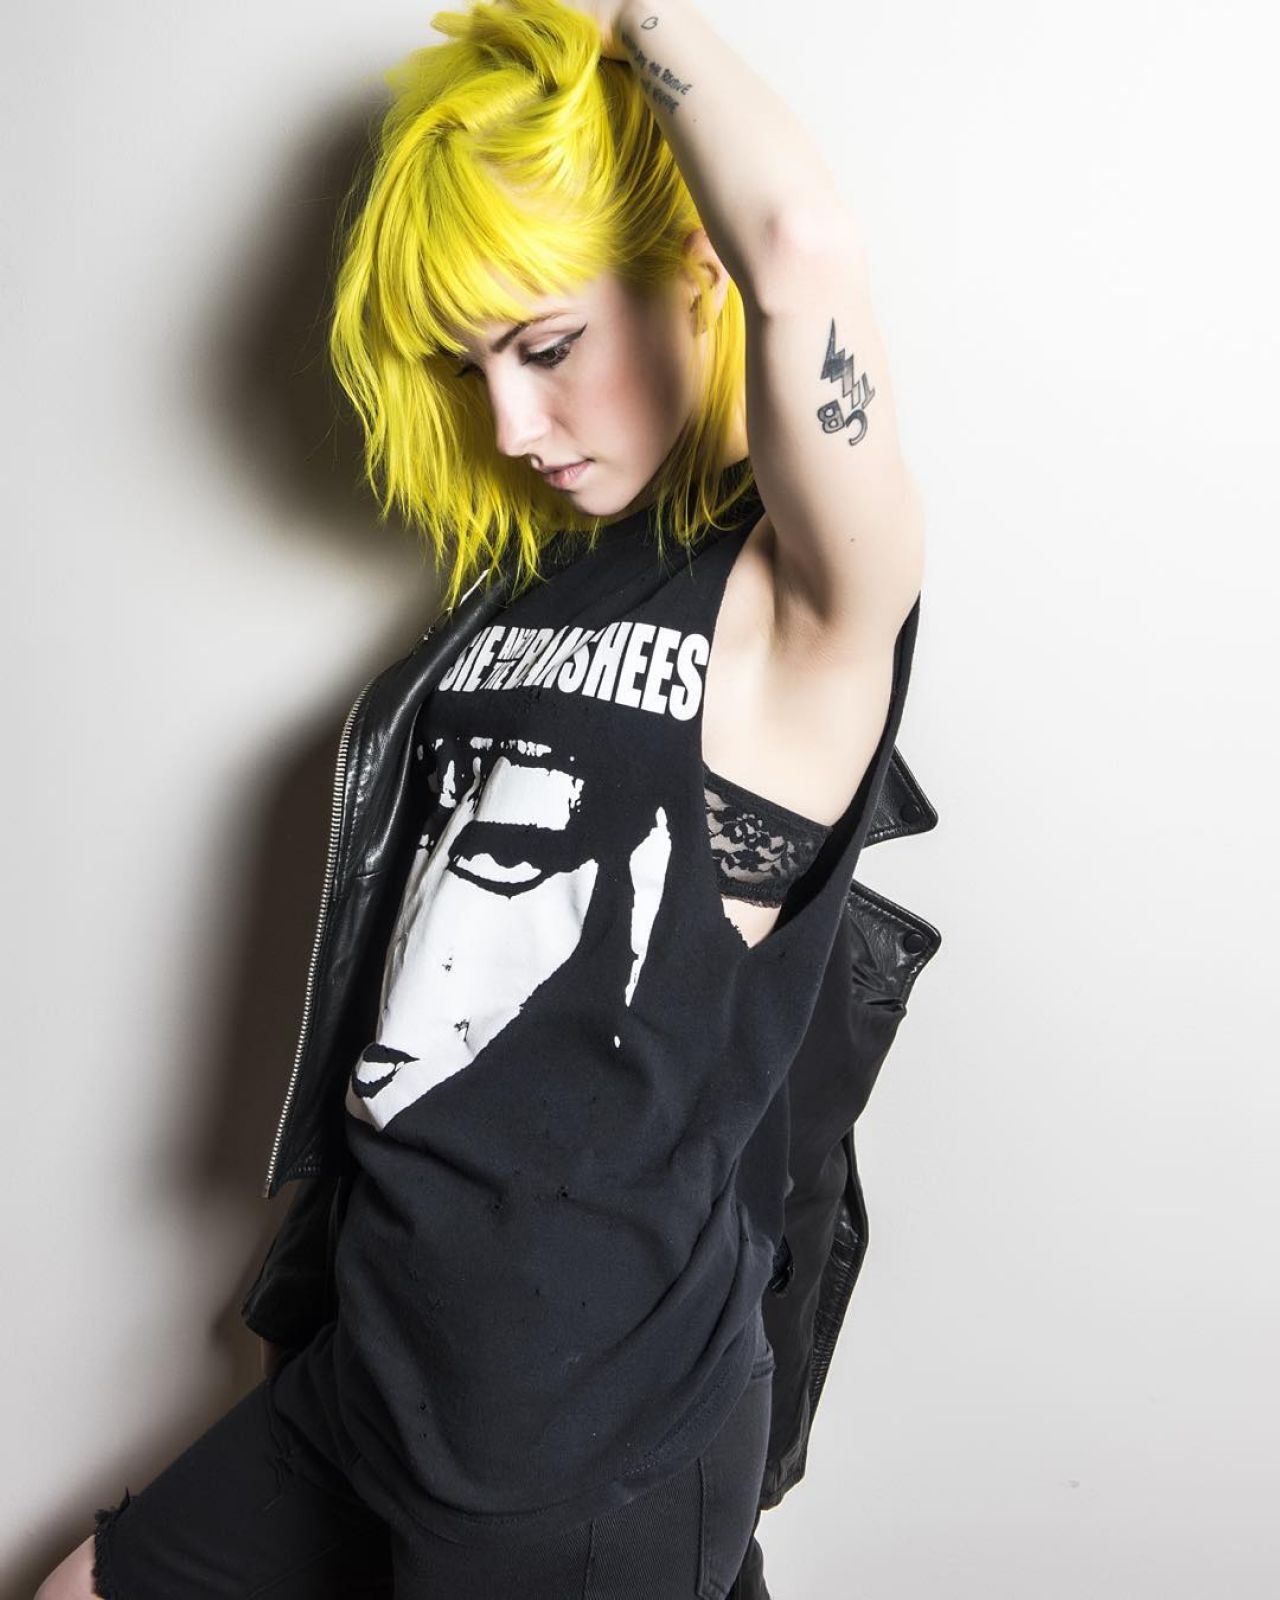 HD wallpaper Paramore Hayley Williams redhead women singer one person   Wallpaper Flare